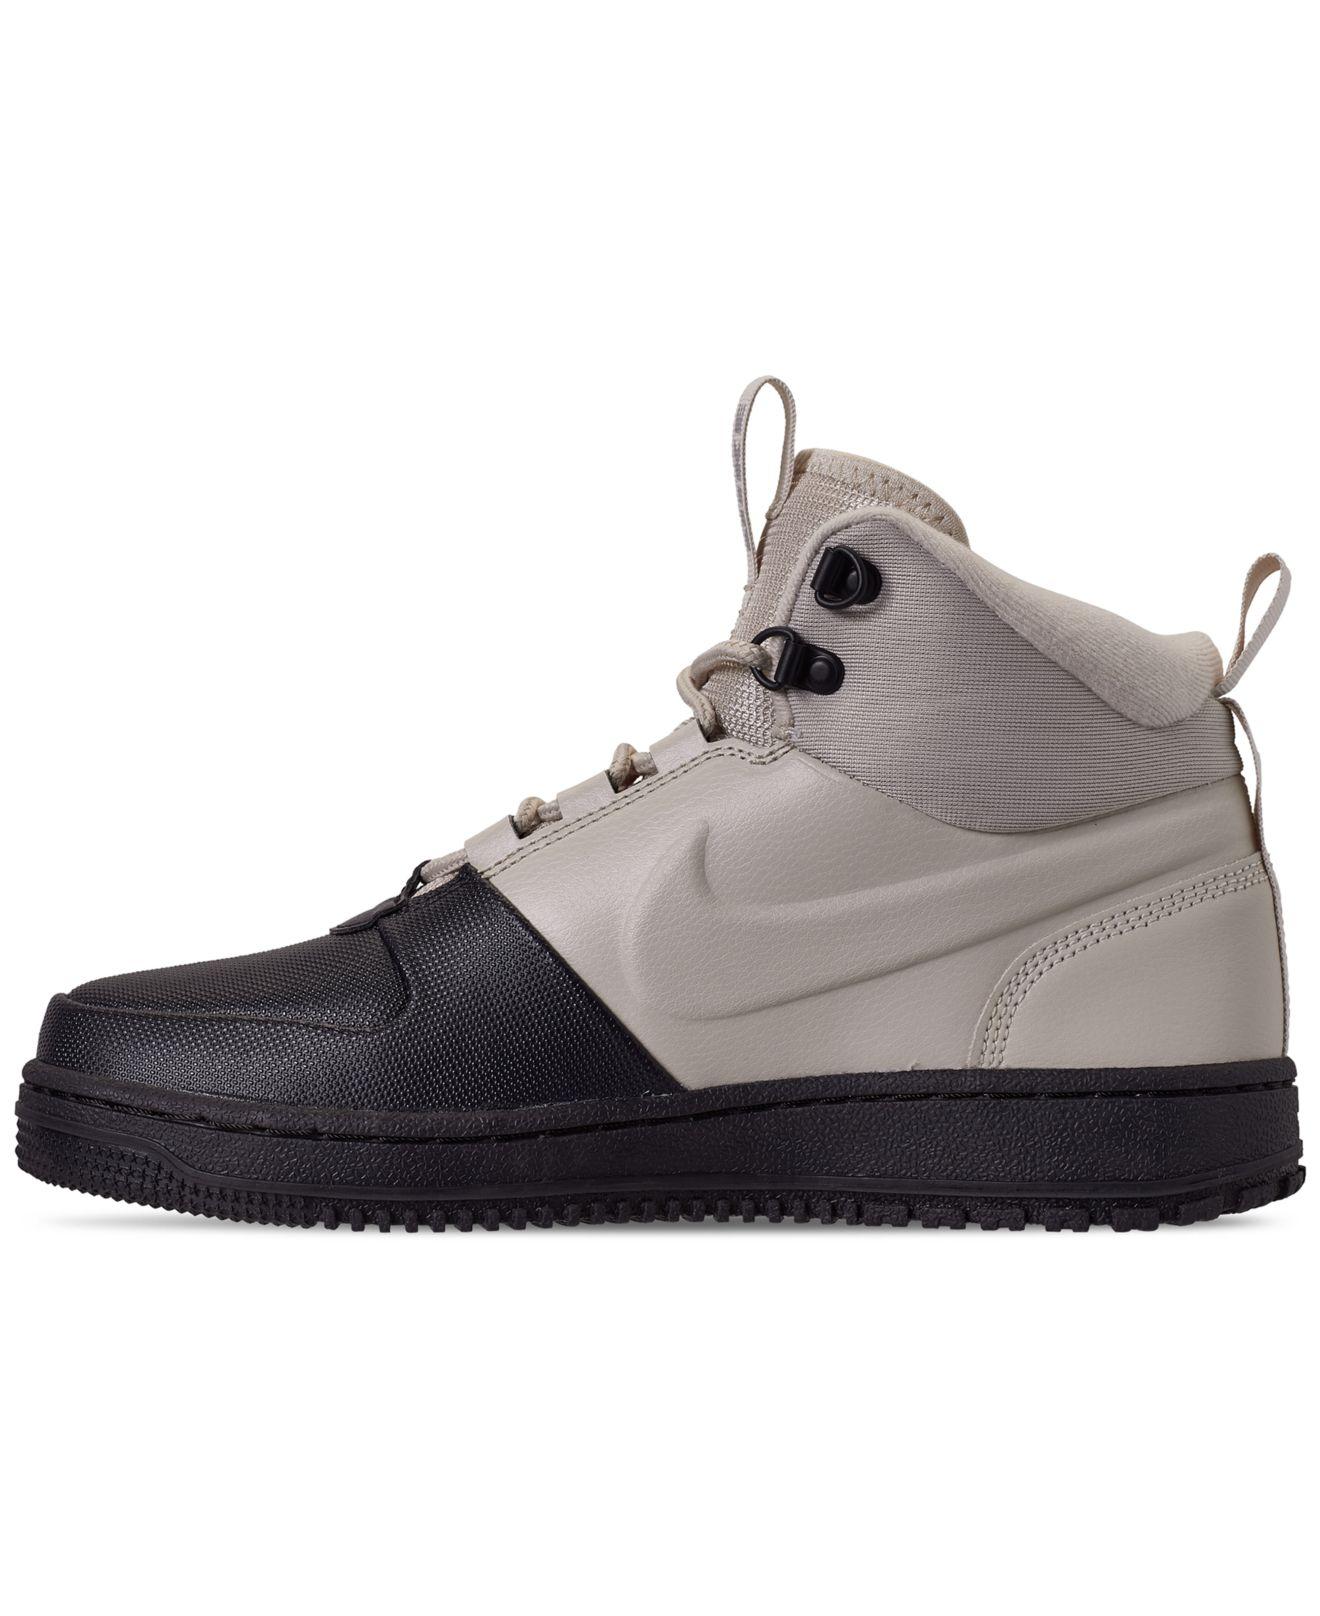 Nike Denim Path Wntr Sneaker Boots From 